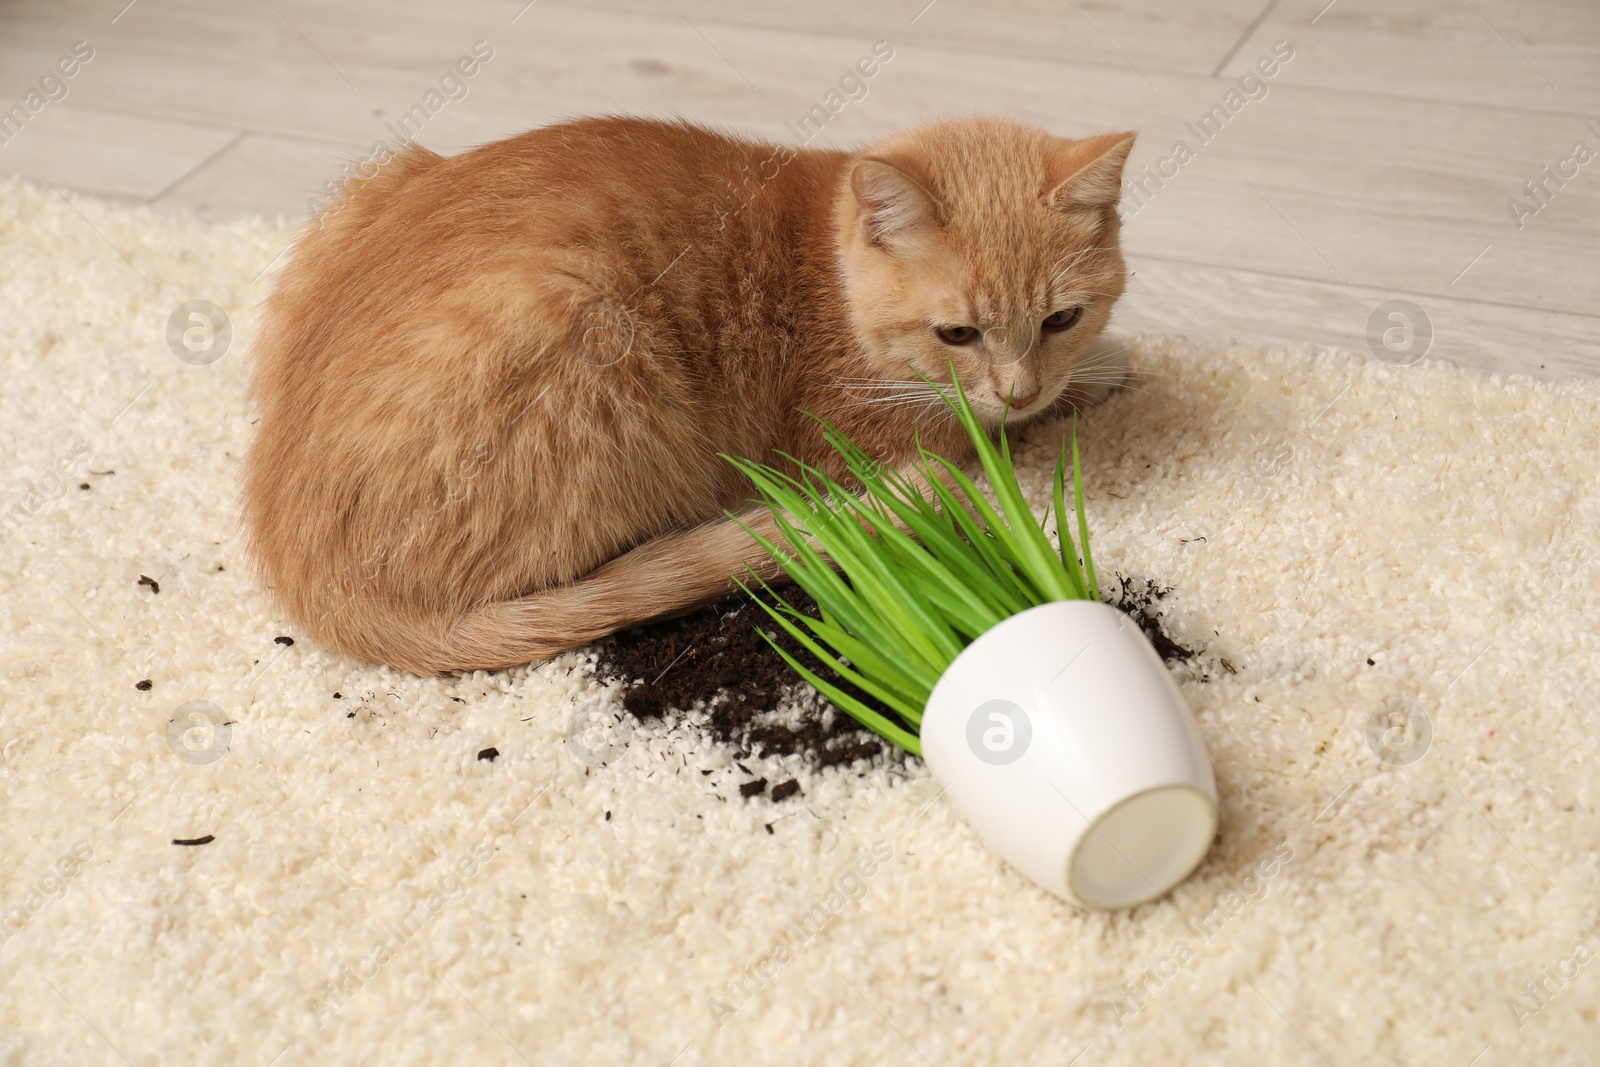 Photo of Cute ginger cat near overturned houseplant on carpet indoors